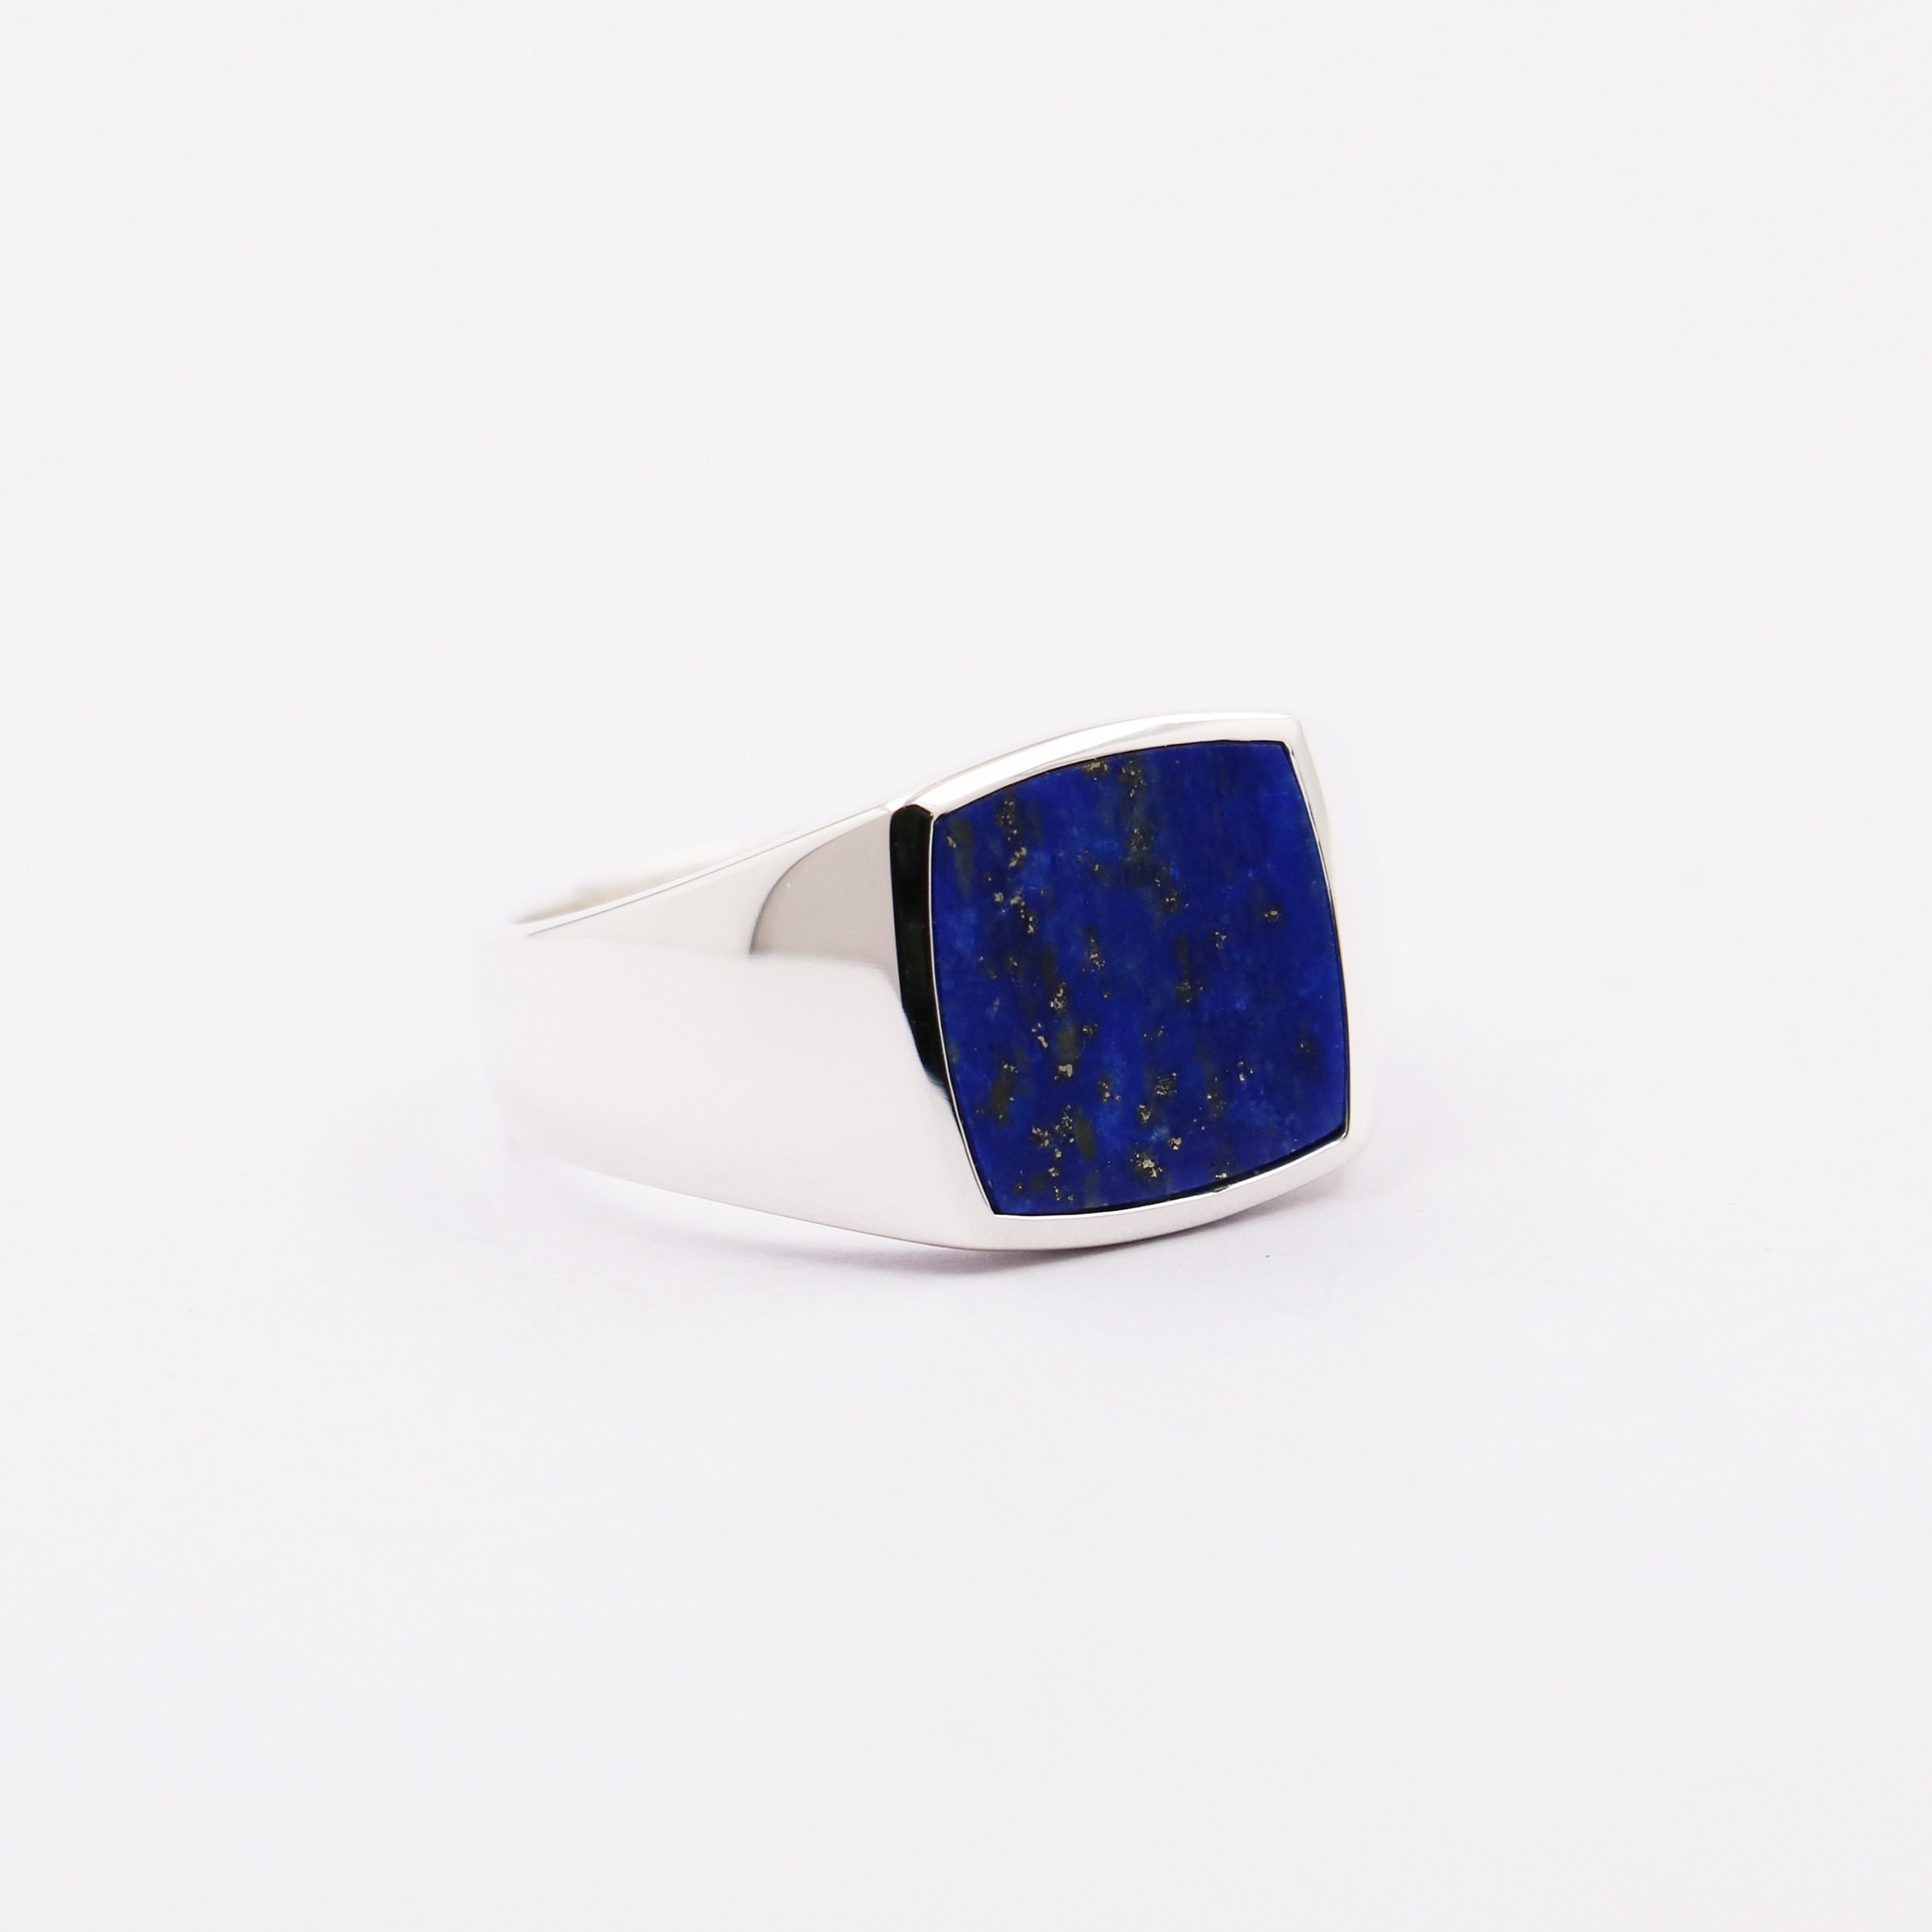 A Lazuli Wisdom Ring | Sterling Silver from Rebel Saint Co with a lapis lazuli stone.